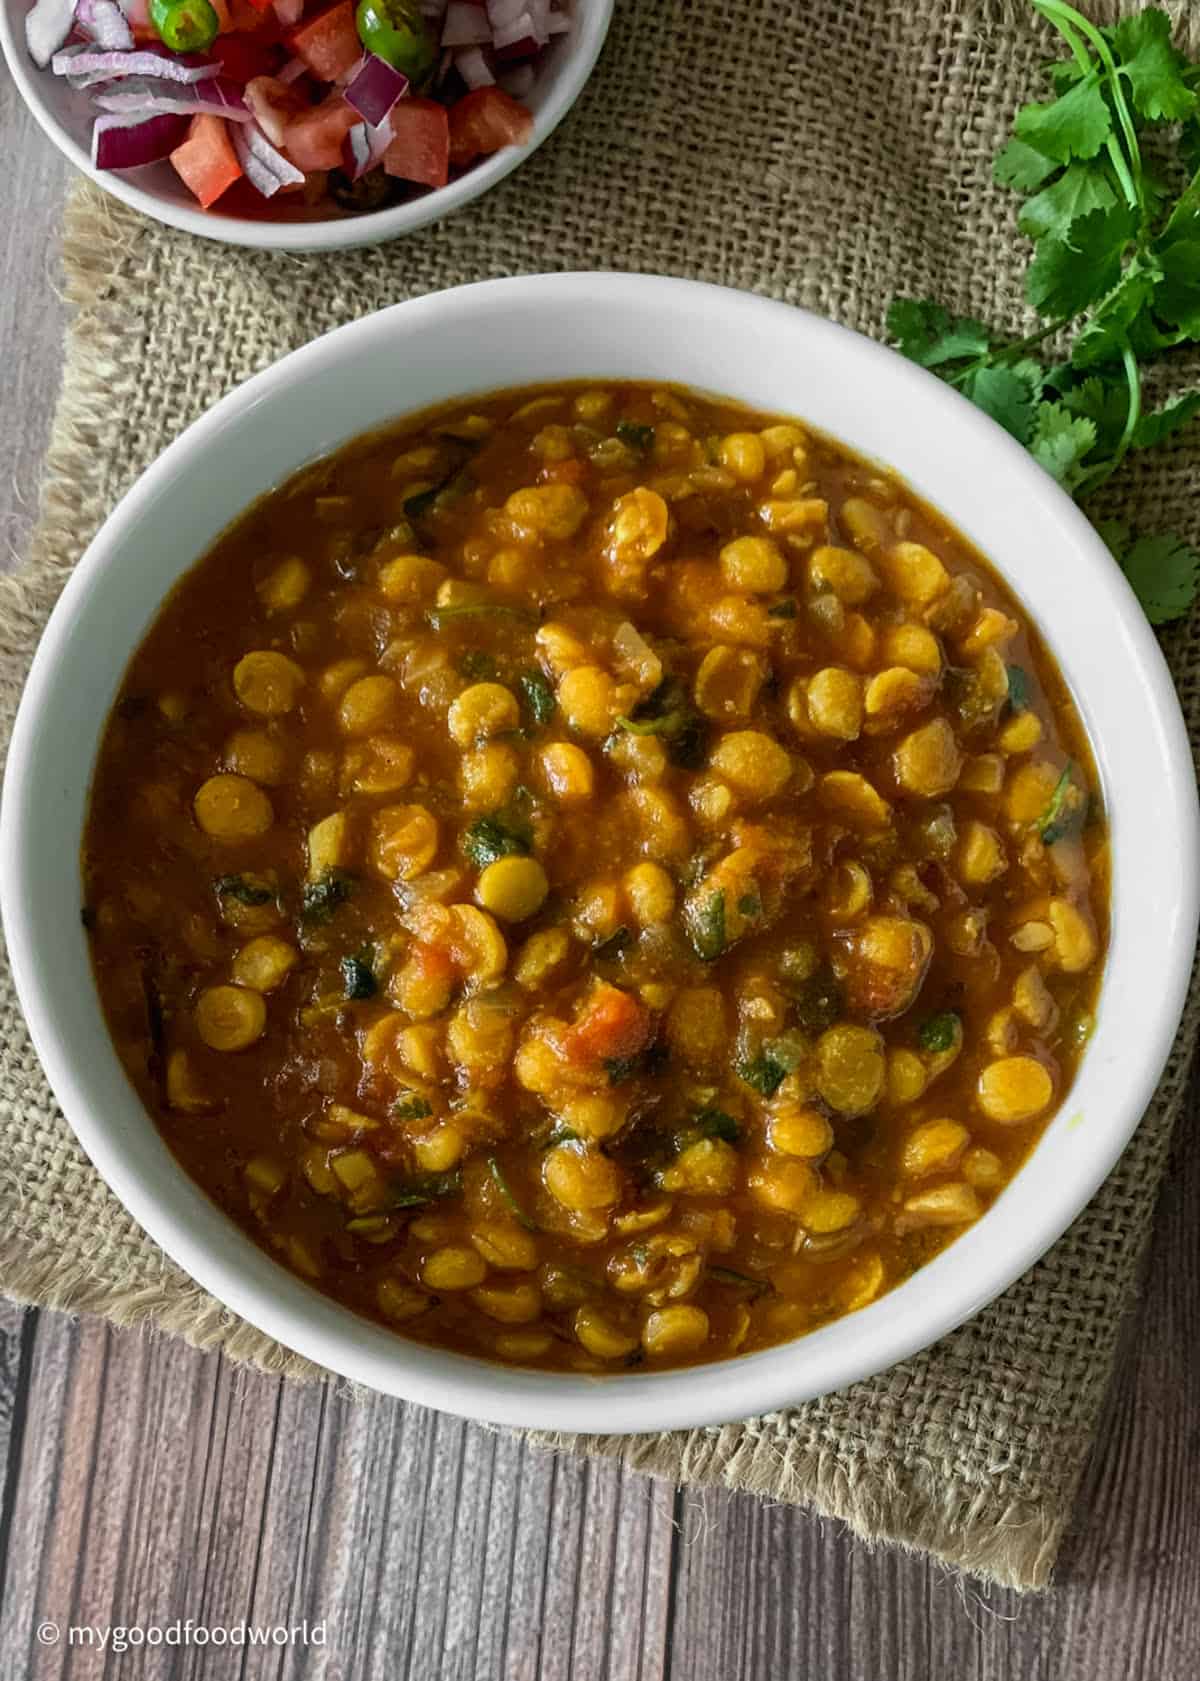 A bowl of chana dal cooked in a tomato sauce, topped with cilantro. The bowl is placed on a piece of burlap on a wooden table,